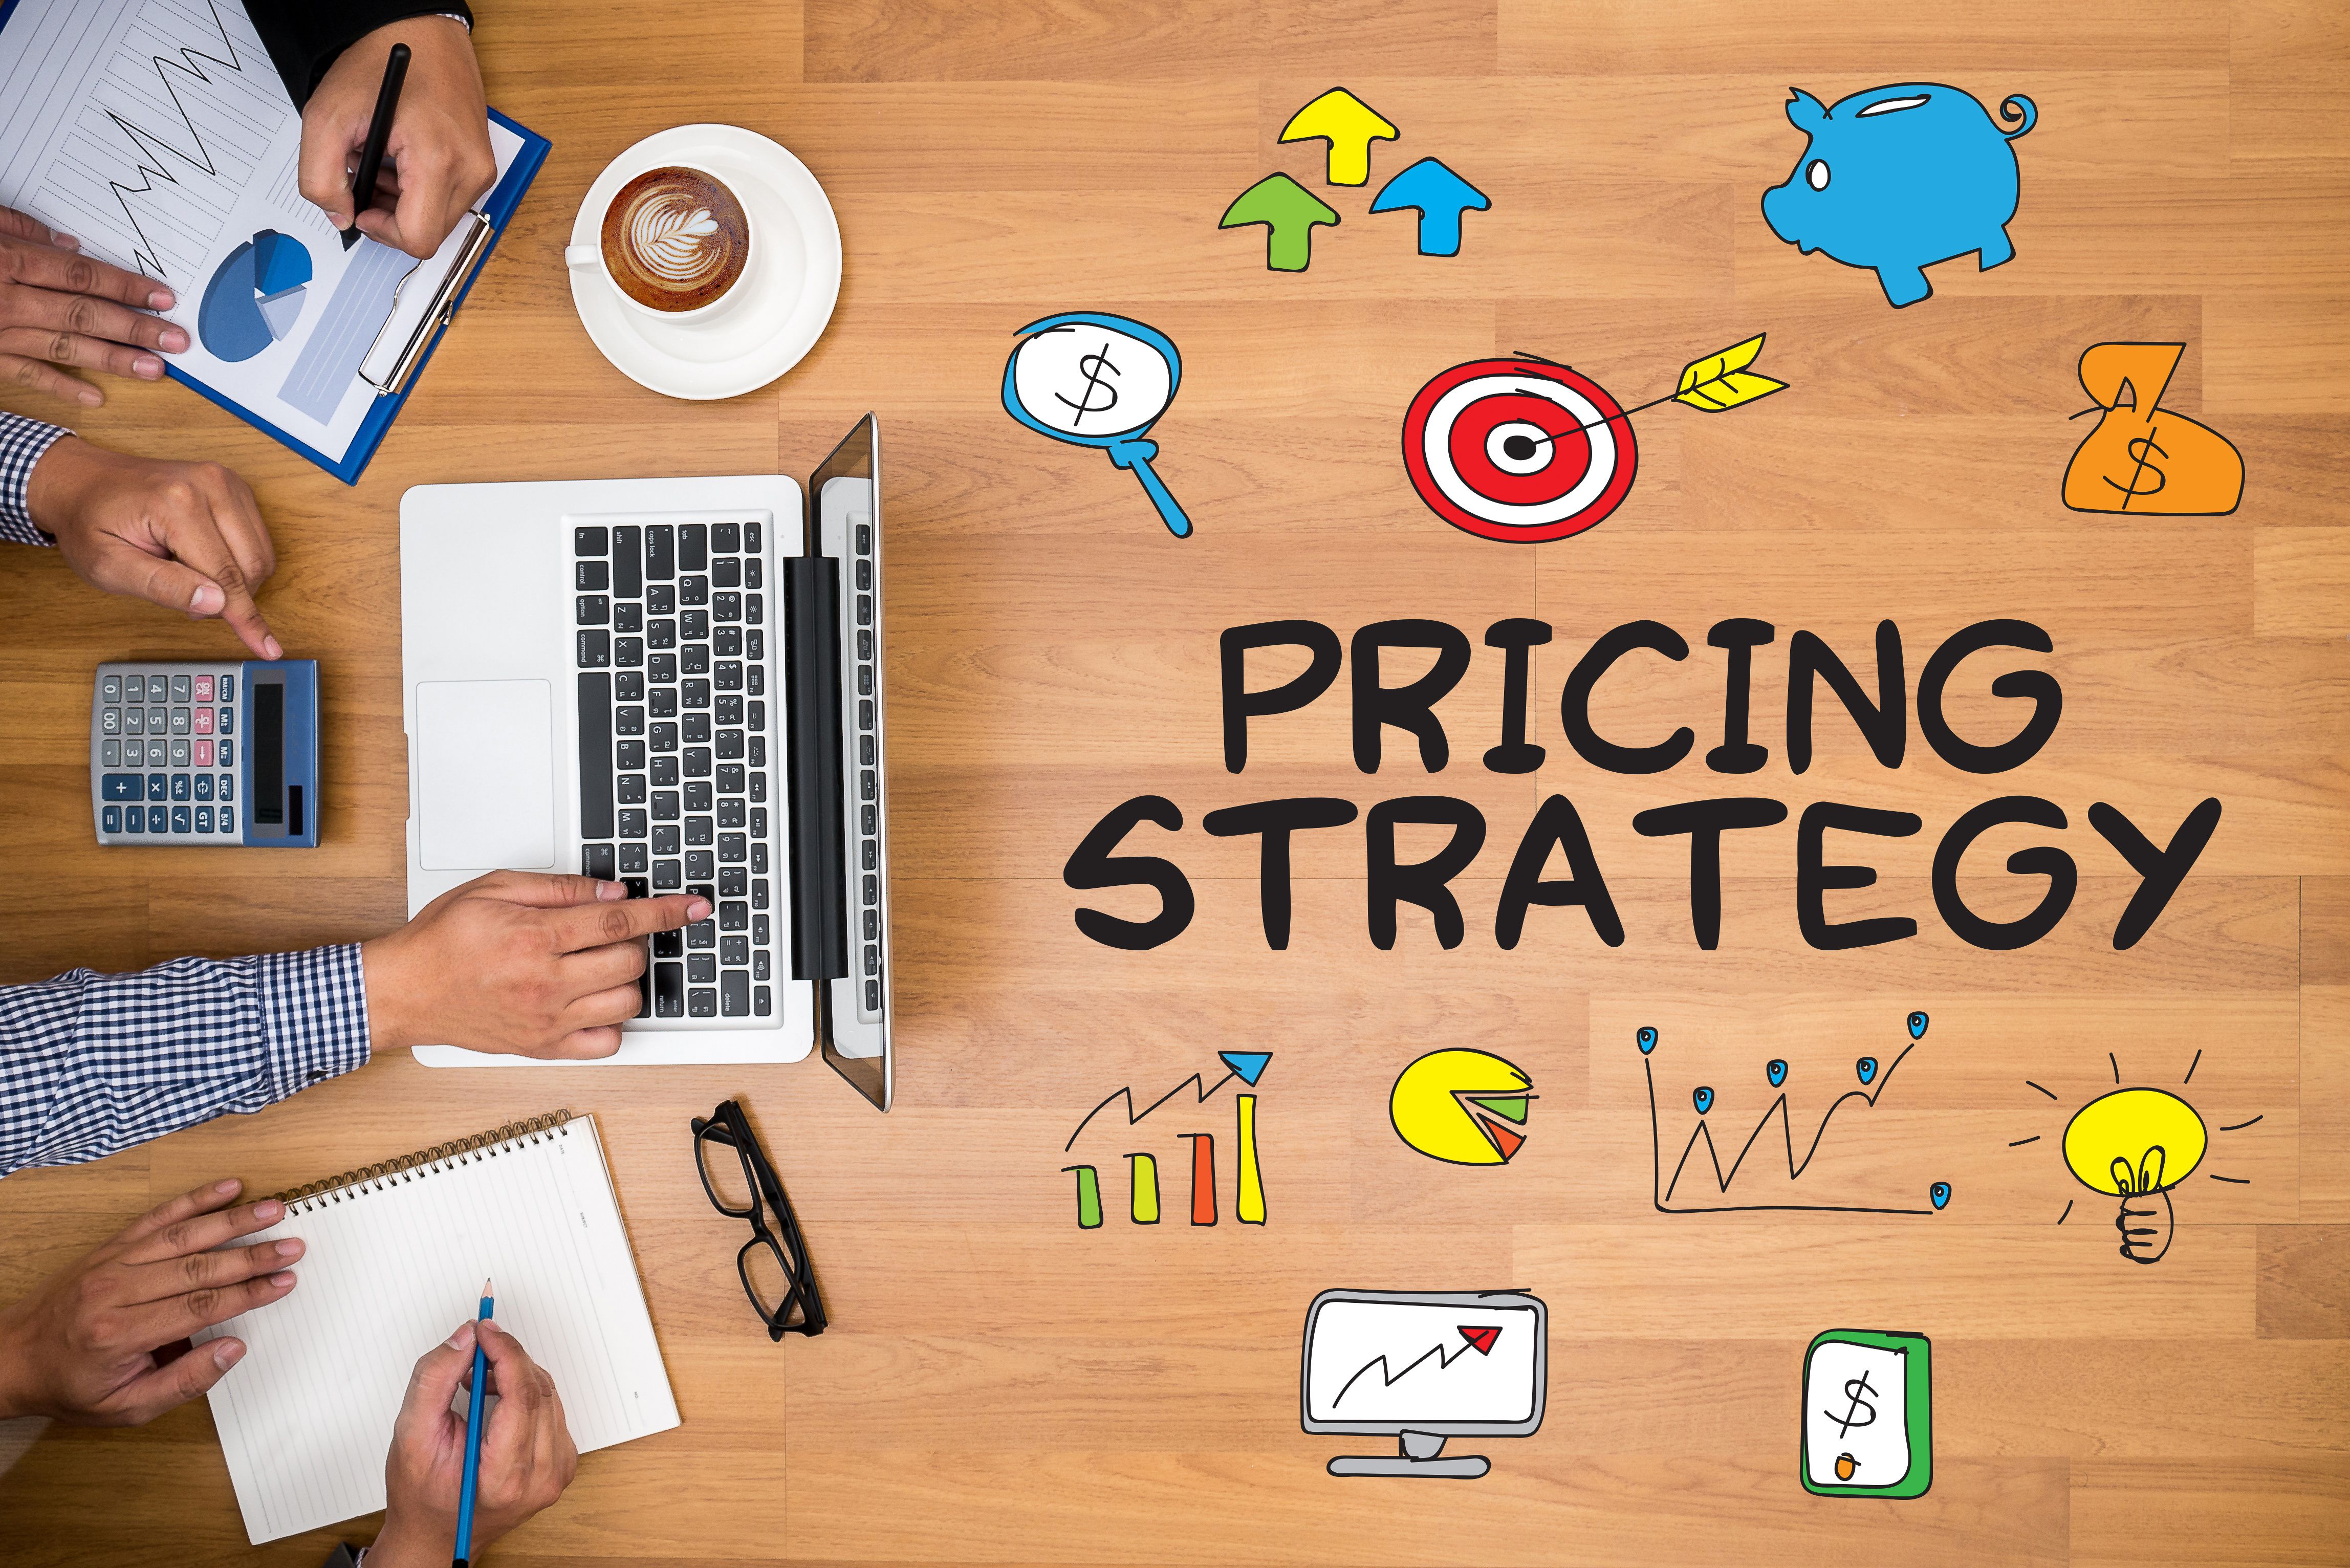 The art of pricing strategy - Pitching your price